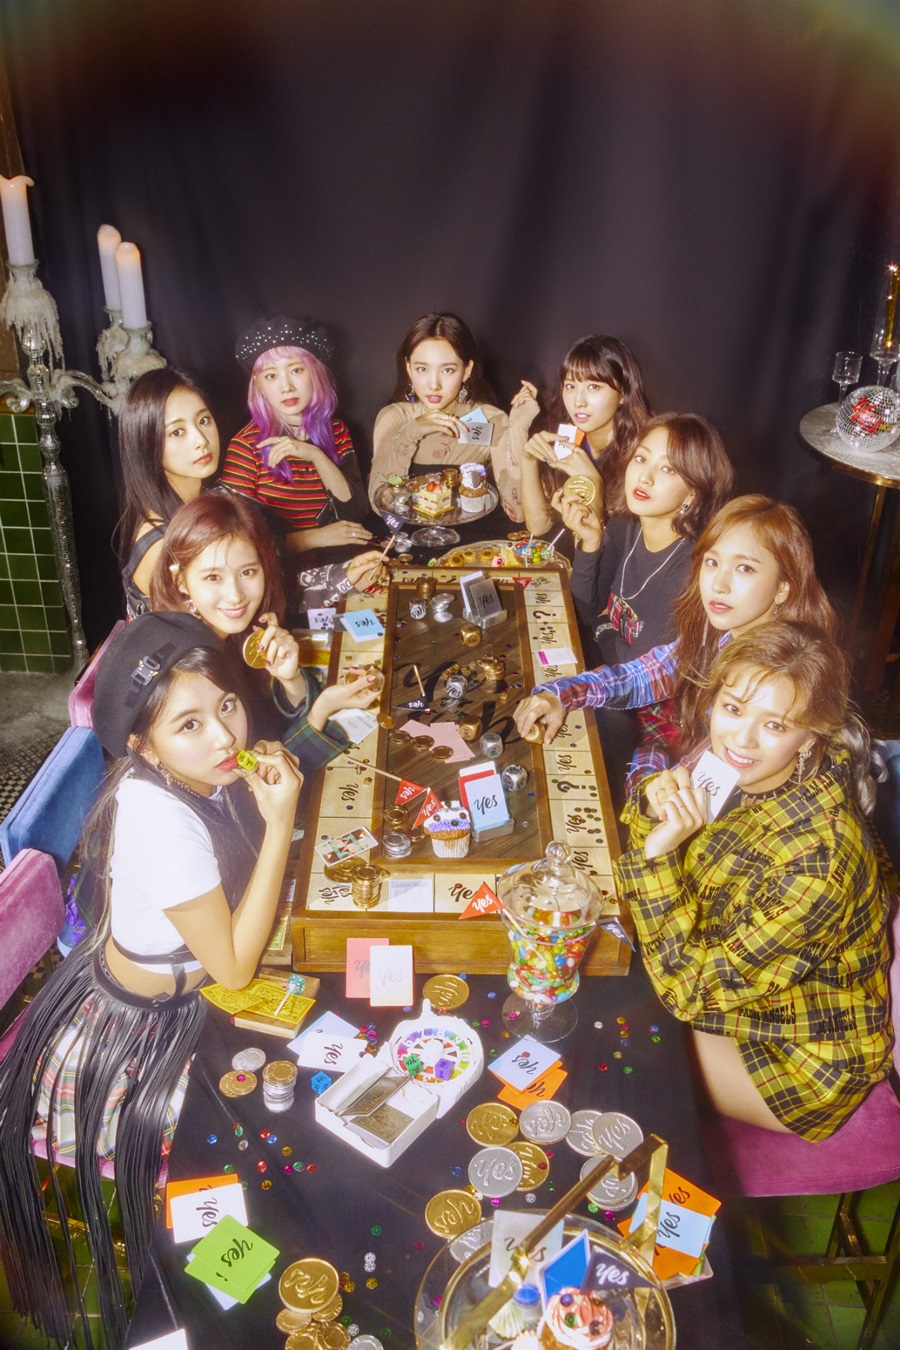 TWICE will go on a four-time Tom Tour in three cities in Japan, including the Tokyo Dome in March and April next year.As a K-pop girl group, I also wrote a new history called Tokyo Dome for the shortest time after the first Tom Tour and overseas The Artists Debut.On the morning of the 15th, JYP Entertainment (hereinafter referred to as JYP) announced the schedule of holding the dome tour TWICE DOME TOUR 2019 (Gase) on the official website of TWICE Japan.According to this, TWICE will perform a dome tour of four performances in three local cities, including Osaka Kyocera Dome on March 21, 2019, Tokyo Dome on March 29 and 30, and Nagoya Dome on April 6.In particular, TWICE is the first K-pop girl group to perform a dome tour, as well as to enter the Tokyo Dome, a symbol of Japan dome tour in the shortest period after the debut of overseas The Artist.On the 14th, TWICE was the first K-pop girl group to announce the appearance of the Japan representative year-end special program NHK Hongbaek Gapjeon for the second consecutive year.TWICE was the only K-pop singer to be included in the lineup this year after last year in the program, which celebrates its 69th anniversary this year.TWICE has also shown strong strength in both Korea and Japan this year and has raised the status of one-top girl group.In Korea, on May 5, he released his mini 6th album YES or YES and the same title song, and swept the top of various music charts at home and abroad and hit 10 consecutive hit home runs.In addition, the title song YES or YES was released after the release, and the Japan Line Music Top 100 chart showed the power to line up all 7 tracks on the album from the top to the top of the 7th, and the album YES or YES was the first Korean album released by TWICE.This year Japan released the single 2nd album Candy Pop, the single 3rd album Wake Me Up and the Regular album BDZ, and the single 2nd album and the Regular album platinum and the single 3rd album.In addition, I concluded the first Arena tour of the 4 cities of Japan, TWICE 1st ARENA TOUR 2018 and met with local fans.Meanwhile, TWICE has achieved more than 1.2 million album sales in Korea and Japan this year alone: three mini album mini albums released in Korea, What is Love?, Special 2 Summer Nights , Mini 6 YES or YES and existing TWICE albums recorded steady sales this year, continuing to record a total of 1,218,158 album sales based on the total volume of Gaon charts.The three album sales volumes released by Japan in 2018 are also 1,351,624 as of October.